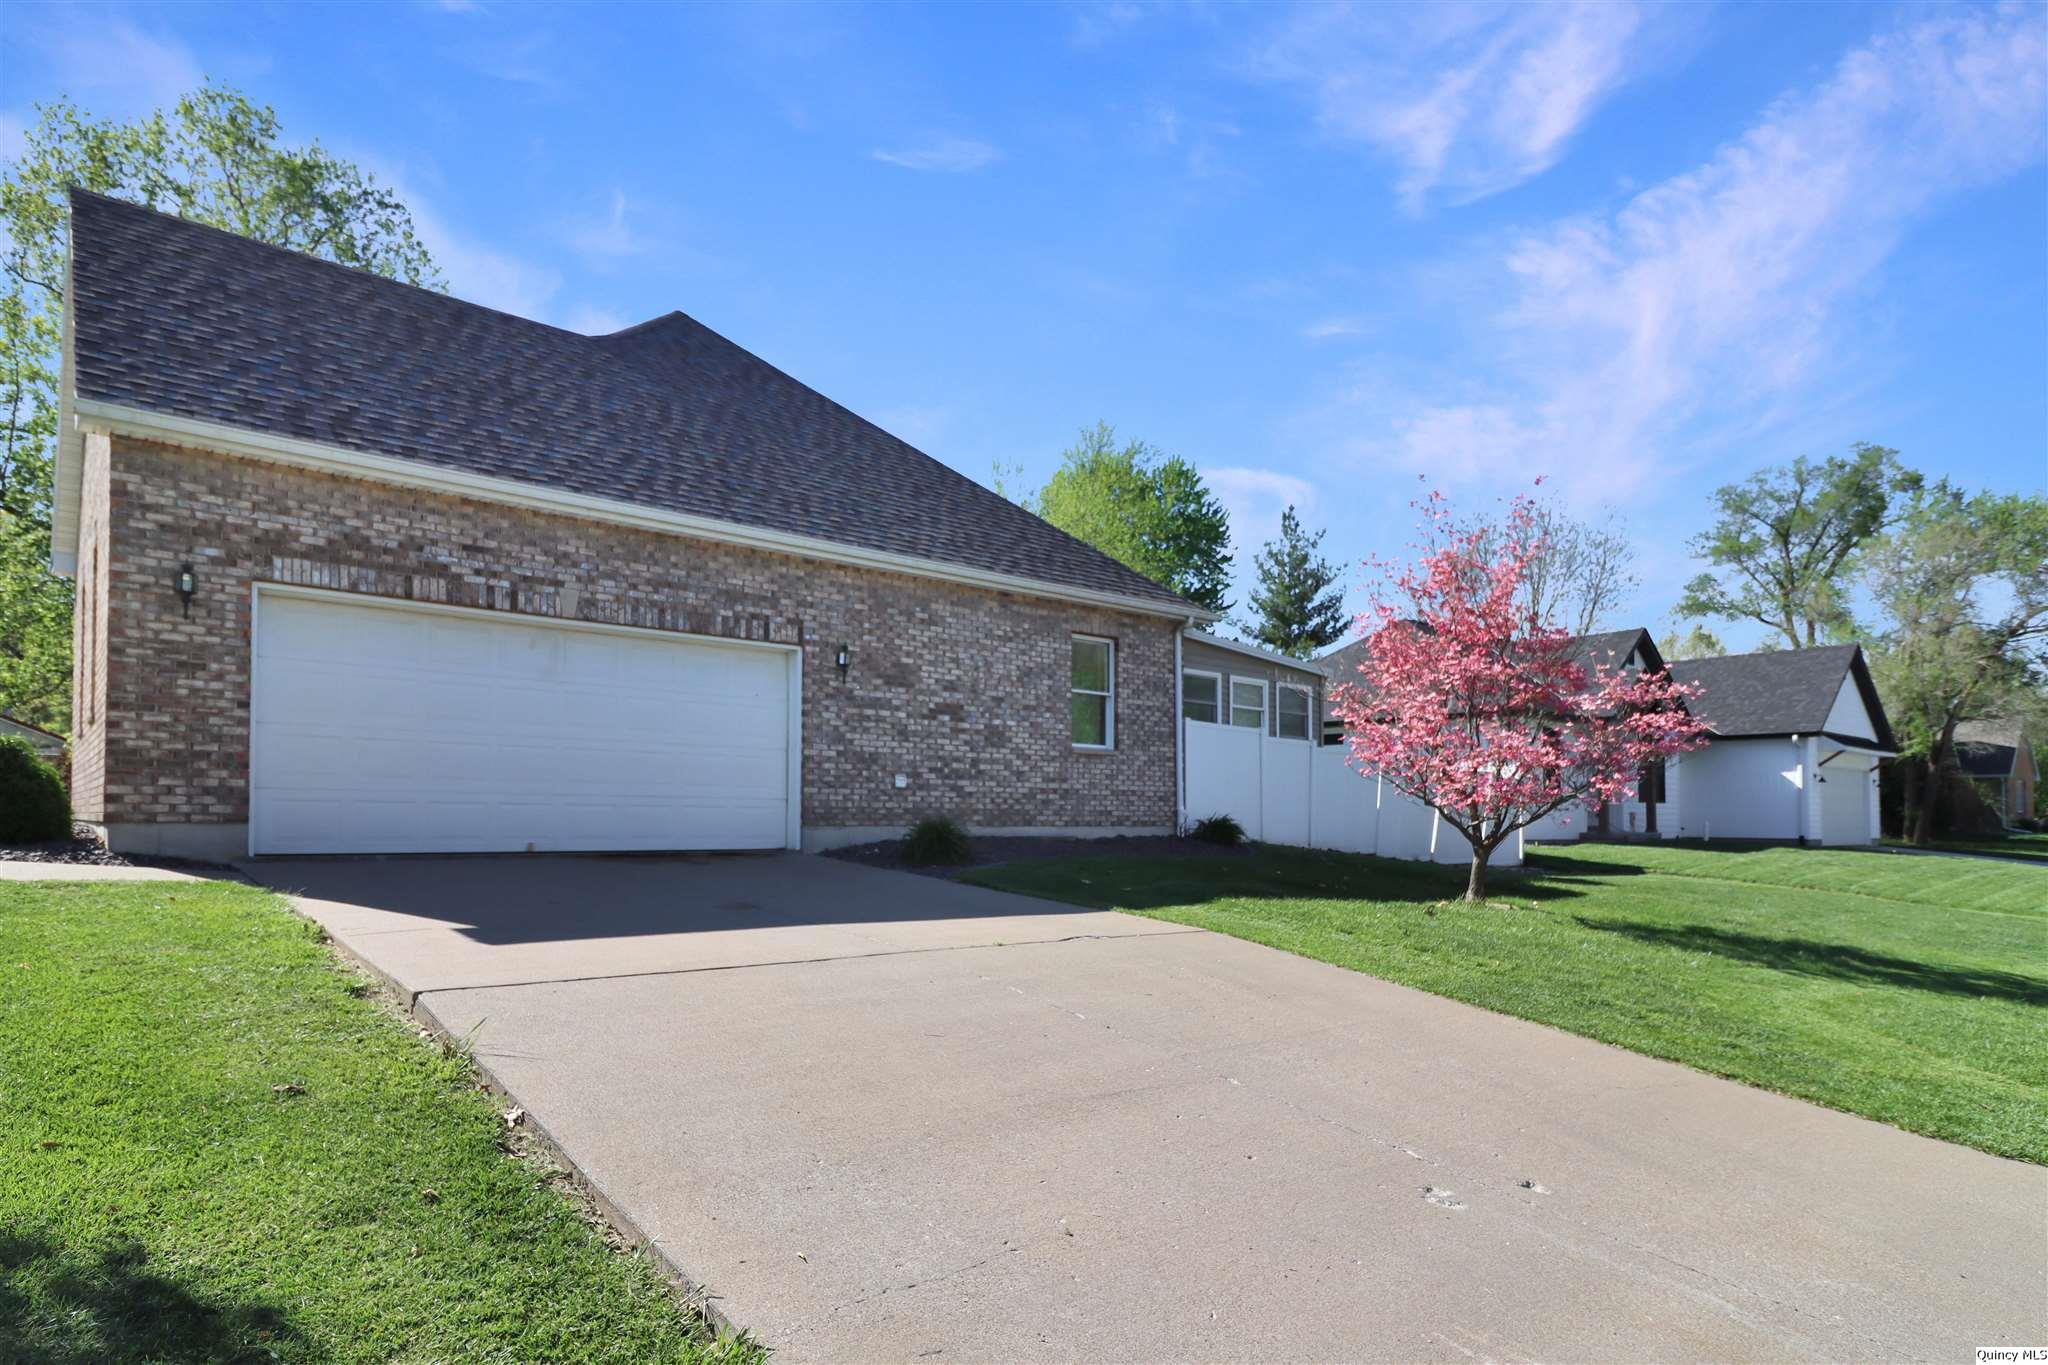 2803 E Oakbrook CT., Quincy, Illinois 62305, 3 Bedrooms Bedrooms, ,3 BathroomsBathrooms,Residential,For Sale,2803 E Oakbrook CT.,203370